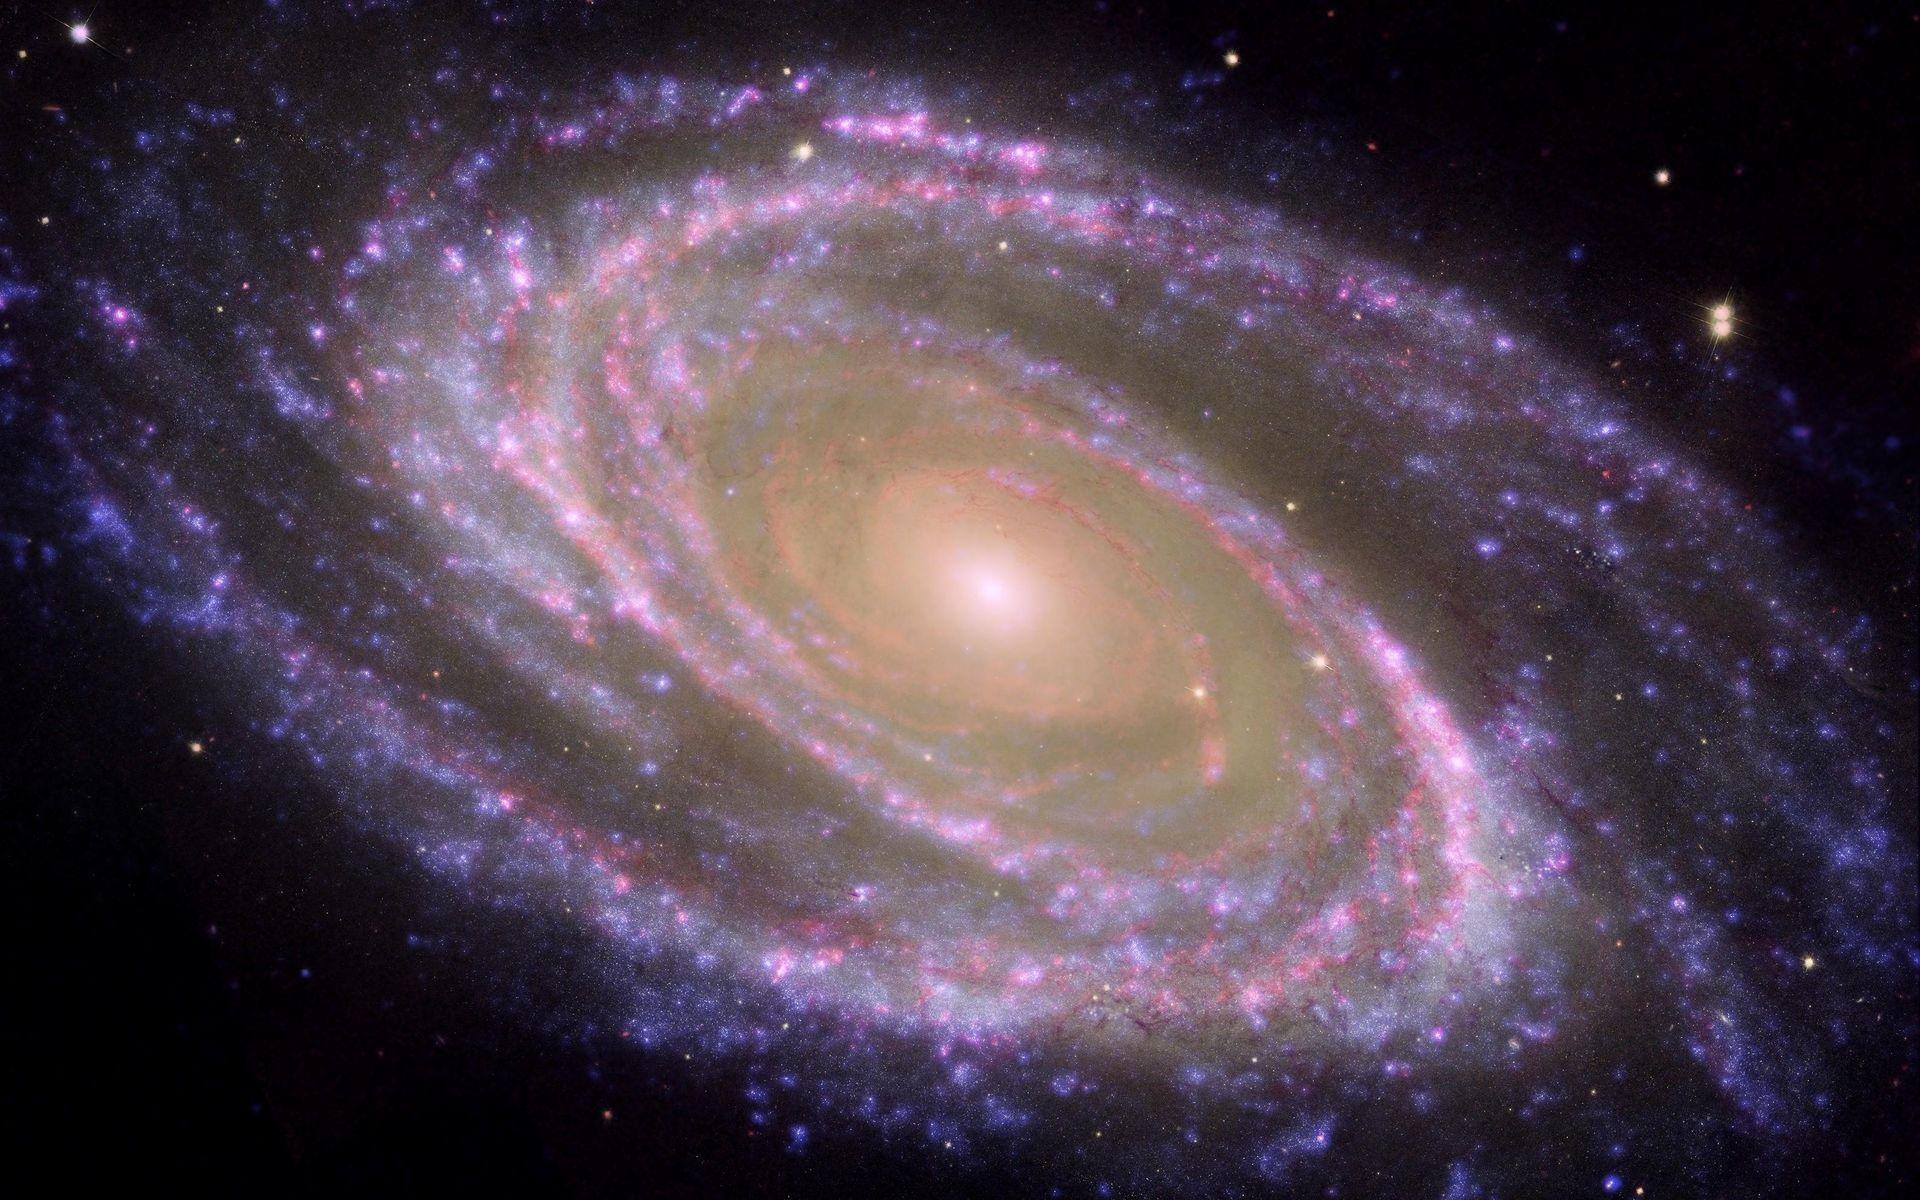 Space Image. M81 Galaxy is Pretty in Pink